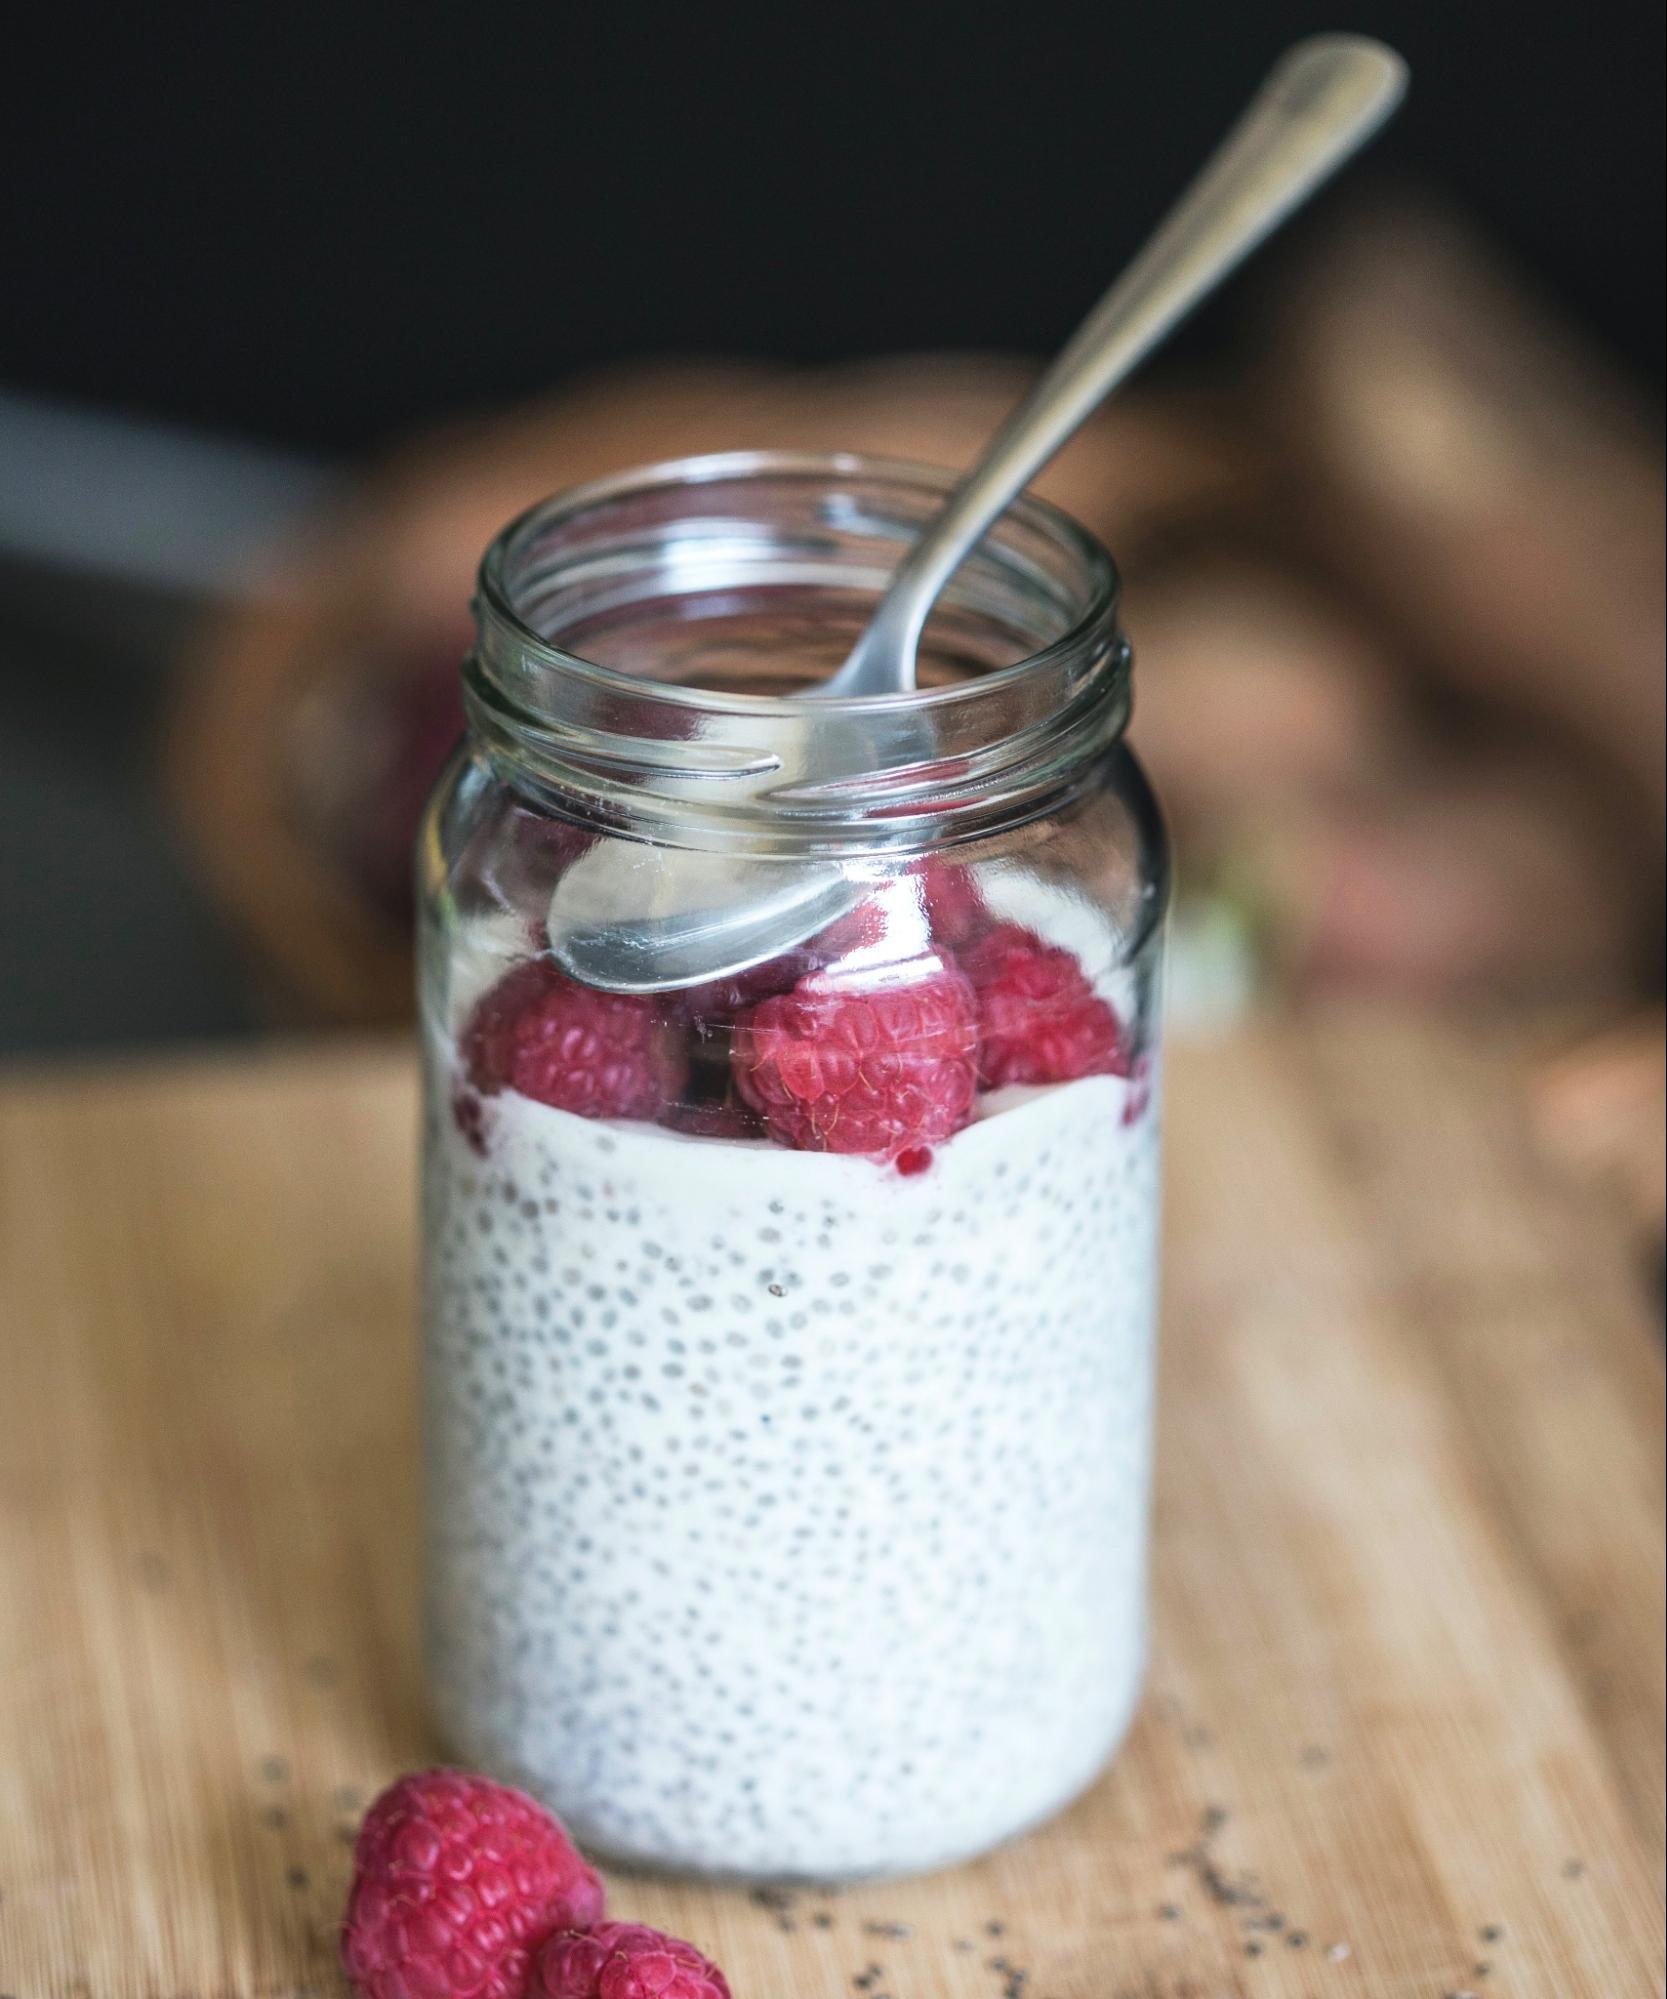 chia seed pudding with berries in a jar